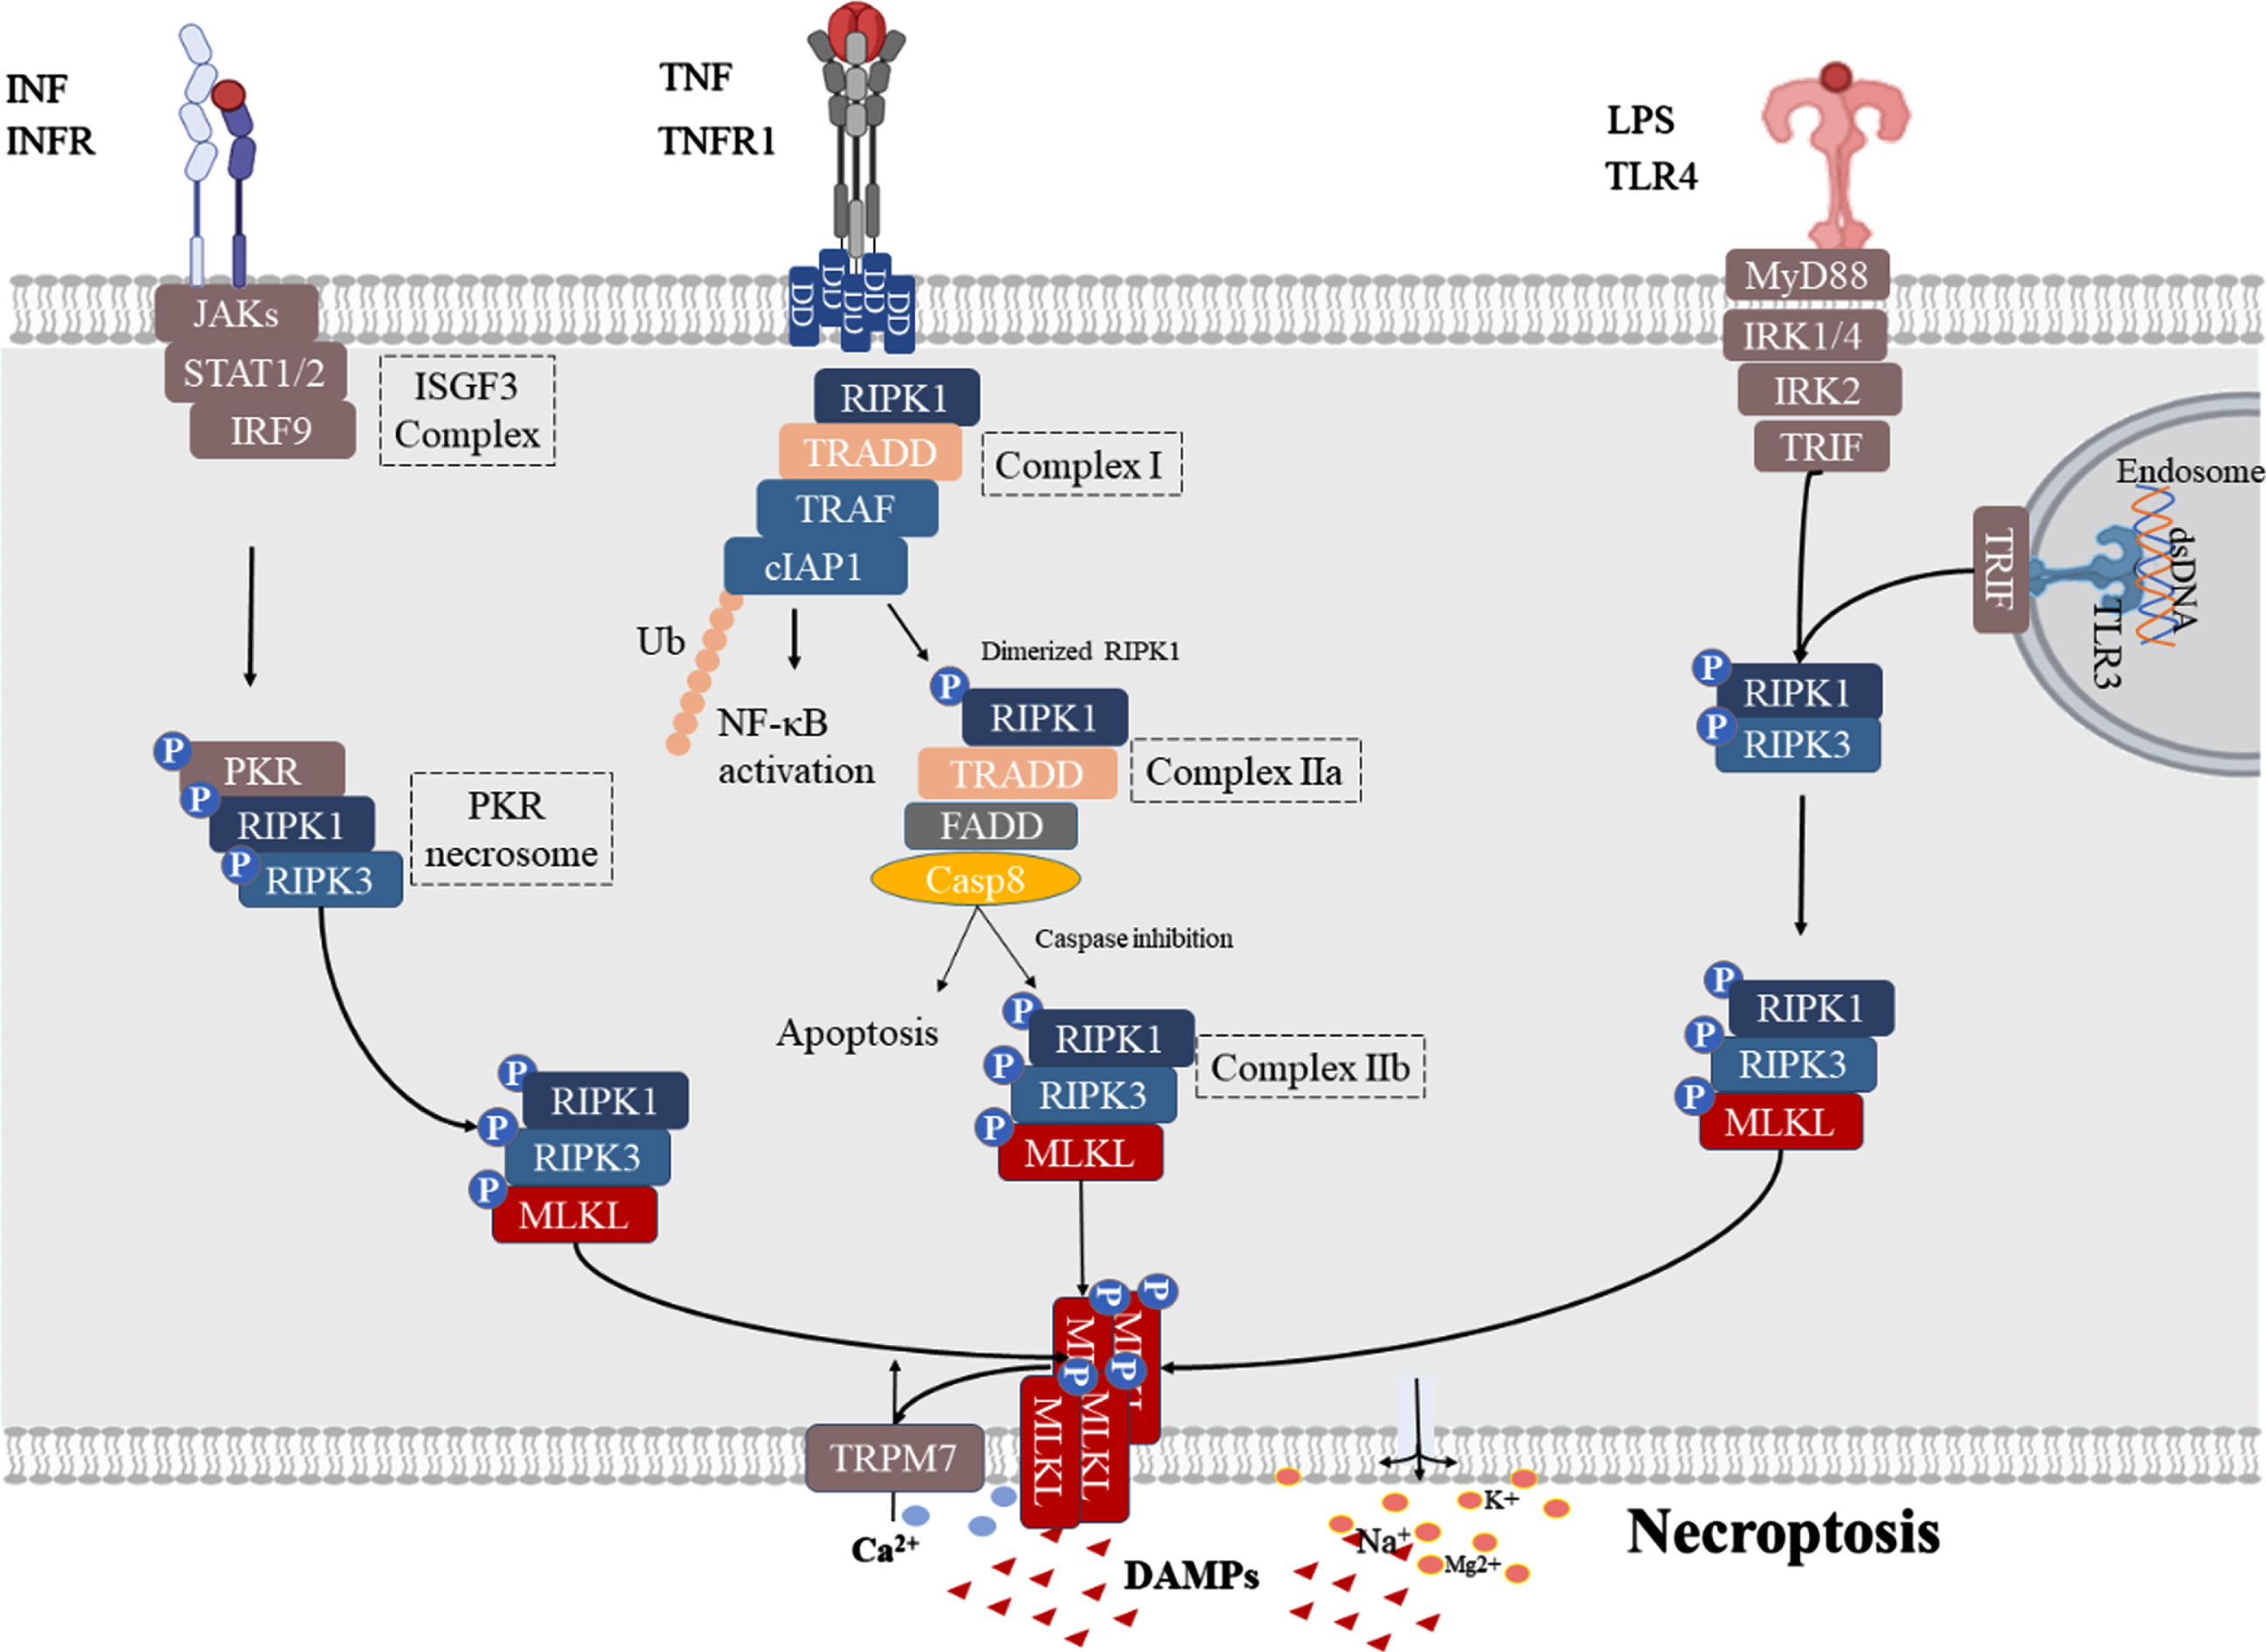 Activated pathway of necroptosis. TNF signaling: Upon stimulation by TNFα, TNFR1 interacts with TNFR1 DD to recruit cellular inhibitor of apoptosis proteins (cIAP), RIPK1, TNF receptor associated factor (TRAF), and TNF receptor-associated death domain (TRADD) to the intracellular portion of TNFR1 to form complex I and activation NF-κB. When the ubiquitination of RIPK1 in complex I is inhibited, RIPK1 dissociates from the cell membrane and recruits TRADD, TRADD-FAS-associated DD protein (FADD) to form complex IIa that activates caspase-8, and leads to apoptosis. When caspase activity is insufficient, RIPK1 and RIPK3 interact through the RIP homology-interacting domain (RHIM) to form RIPK1-RIPK3 necrosomes and phosphorylate RIPK3 (complex IIb). This is followed by p-RIPK3 which can phosphorylate MLKL, facilitating its translocation to the plasma membrane where MLKL leads to cell lysis, resulting in Ca2 + influx, Na+, K+, and Mg2 + efflux, and DAMP release. IFN signaling: Binding of IFN-I to IFNAR1 further leads to PKR necrosome formation by activating the assembly of the ISGF3 complex, which phosphorylates MLKL to form RIPK1-RIPK3-MLKL for necroptosis. TLR signaling: TLR3/4 are activated by their respective ligands, and TLRs can activate necroptosis by recruiting RIPK1-RIPK3-MLKL necrosomes by linking TRIF.